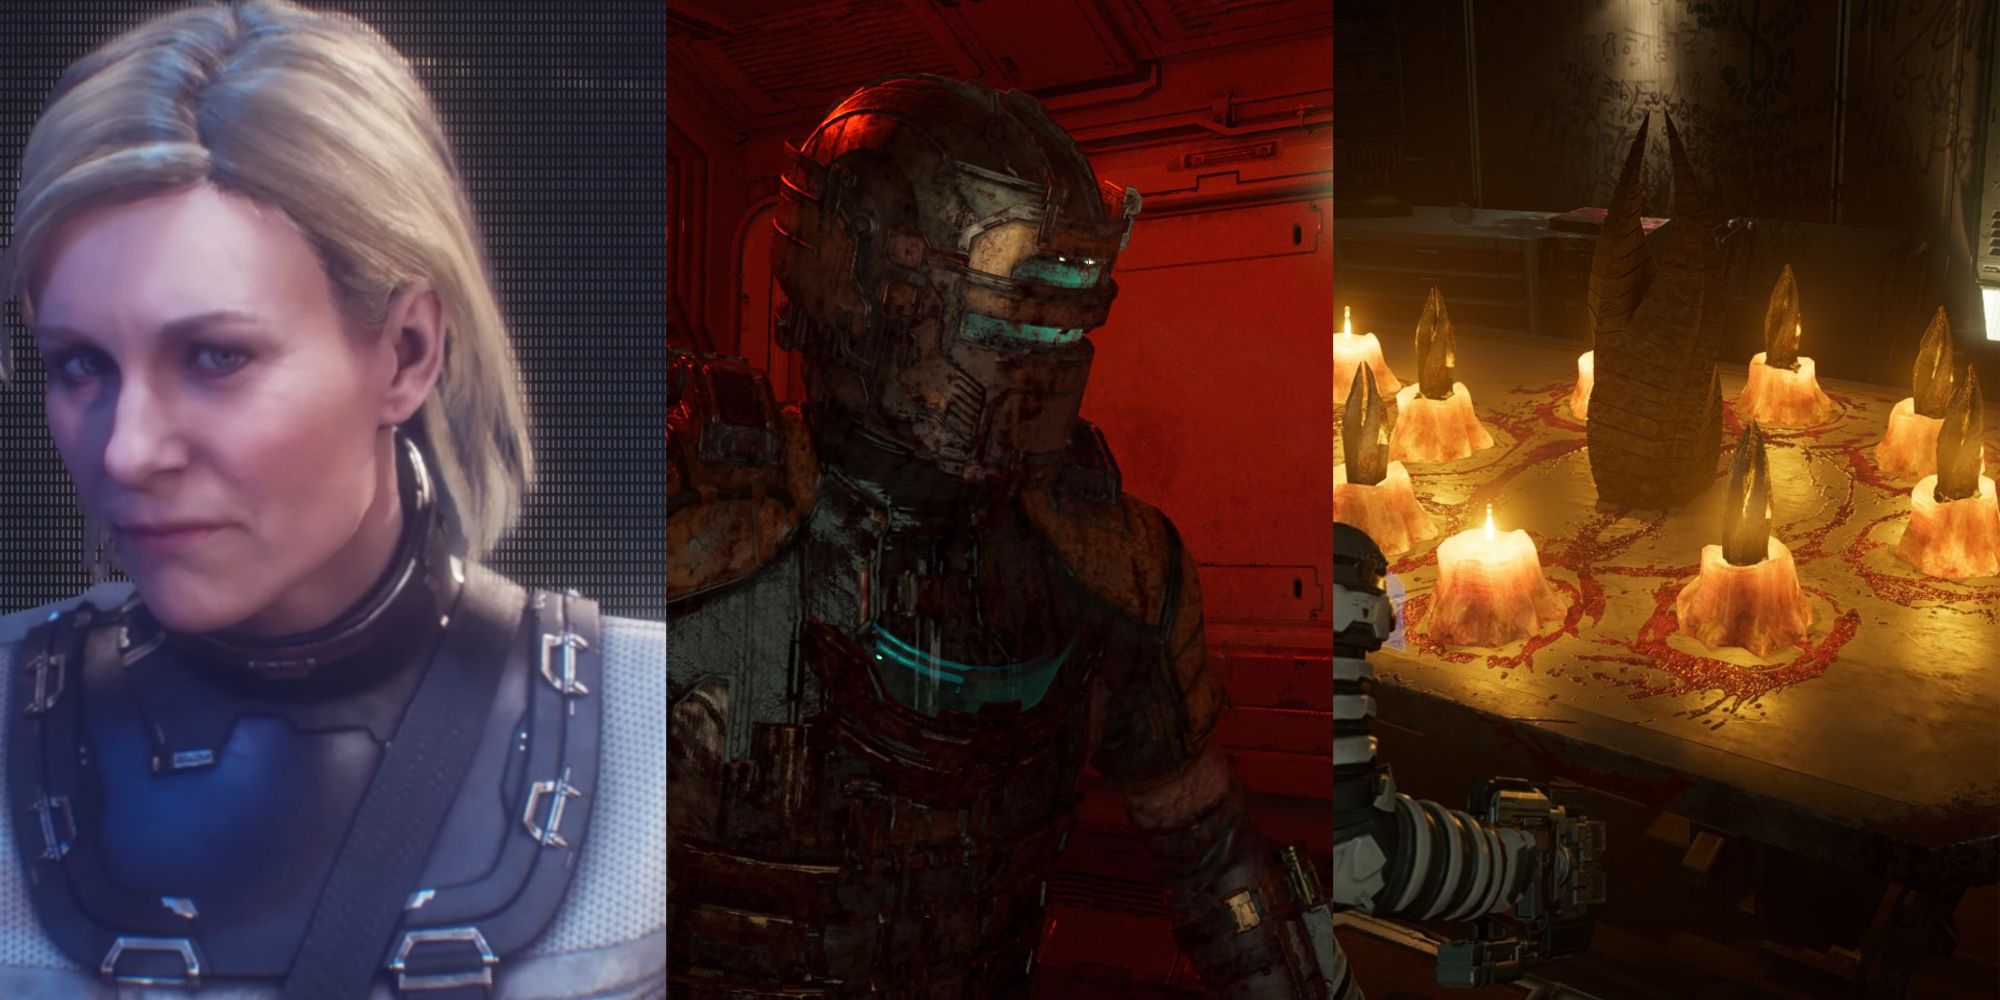 Hypothetical question: Let's say Motive gets the go ahead to remake Dead  Space 2, and it's successful. What would you want them to do with Dead  Space 3? Another faithful remake but